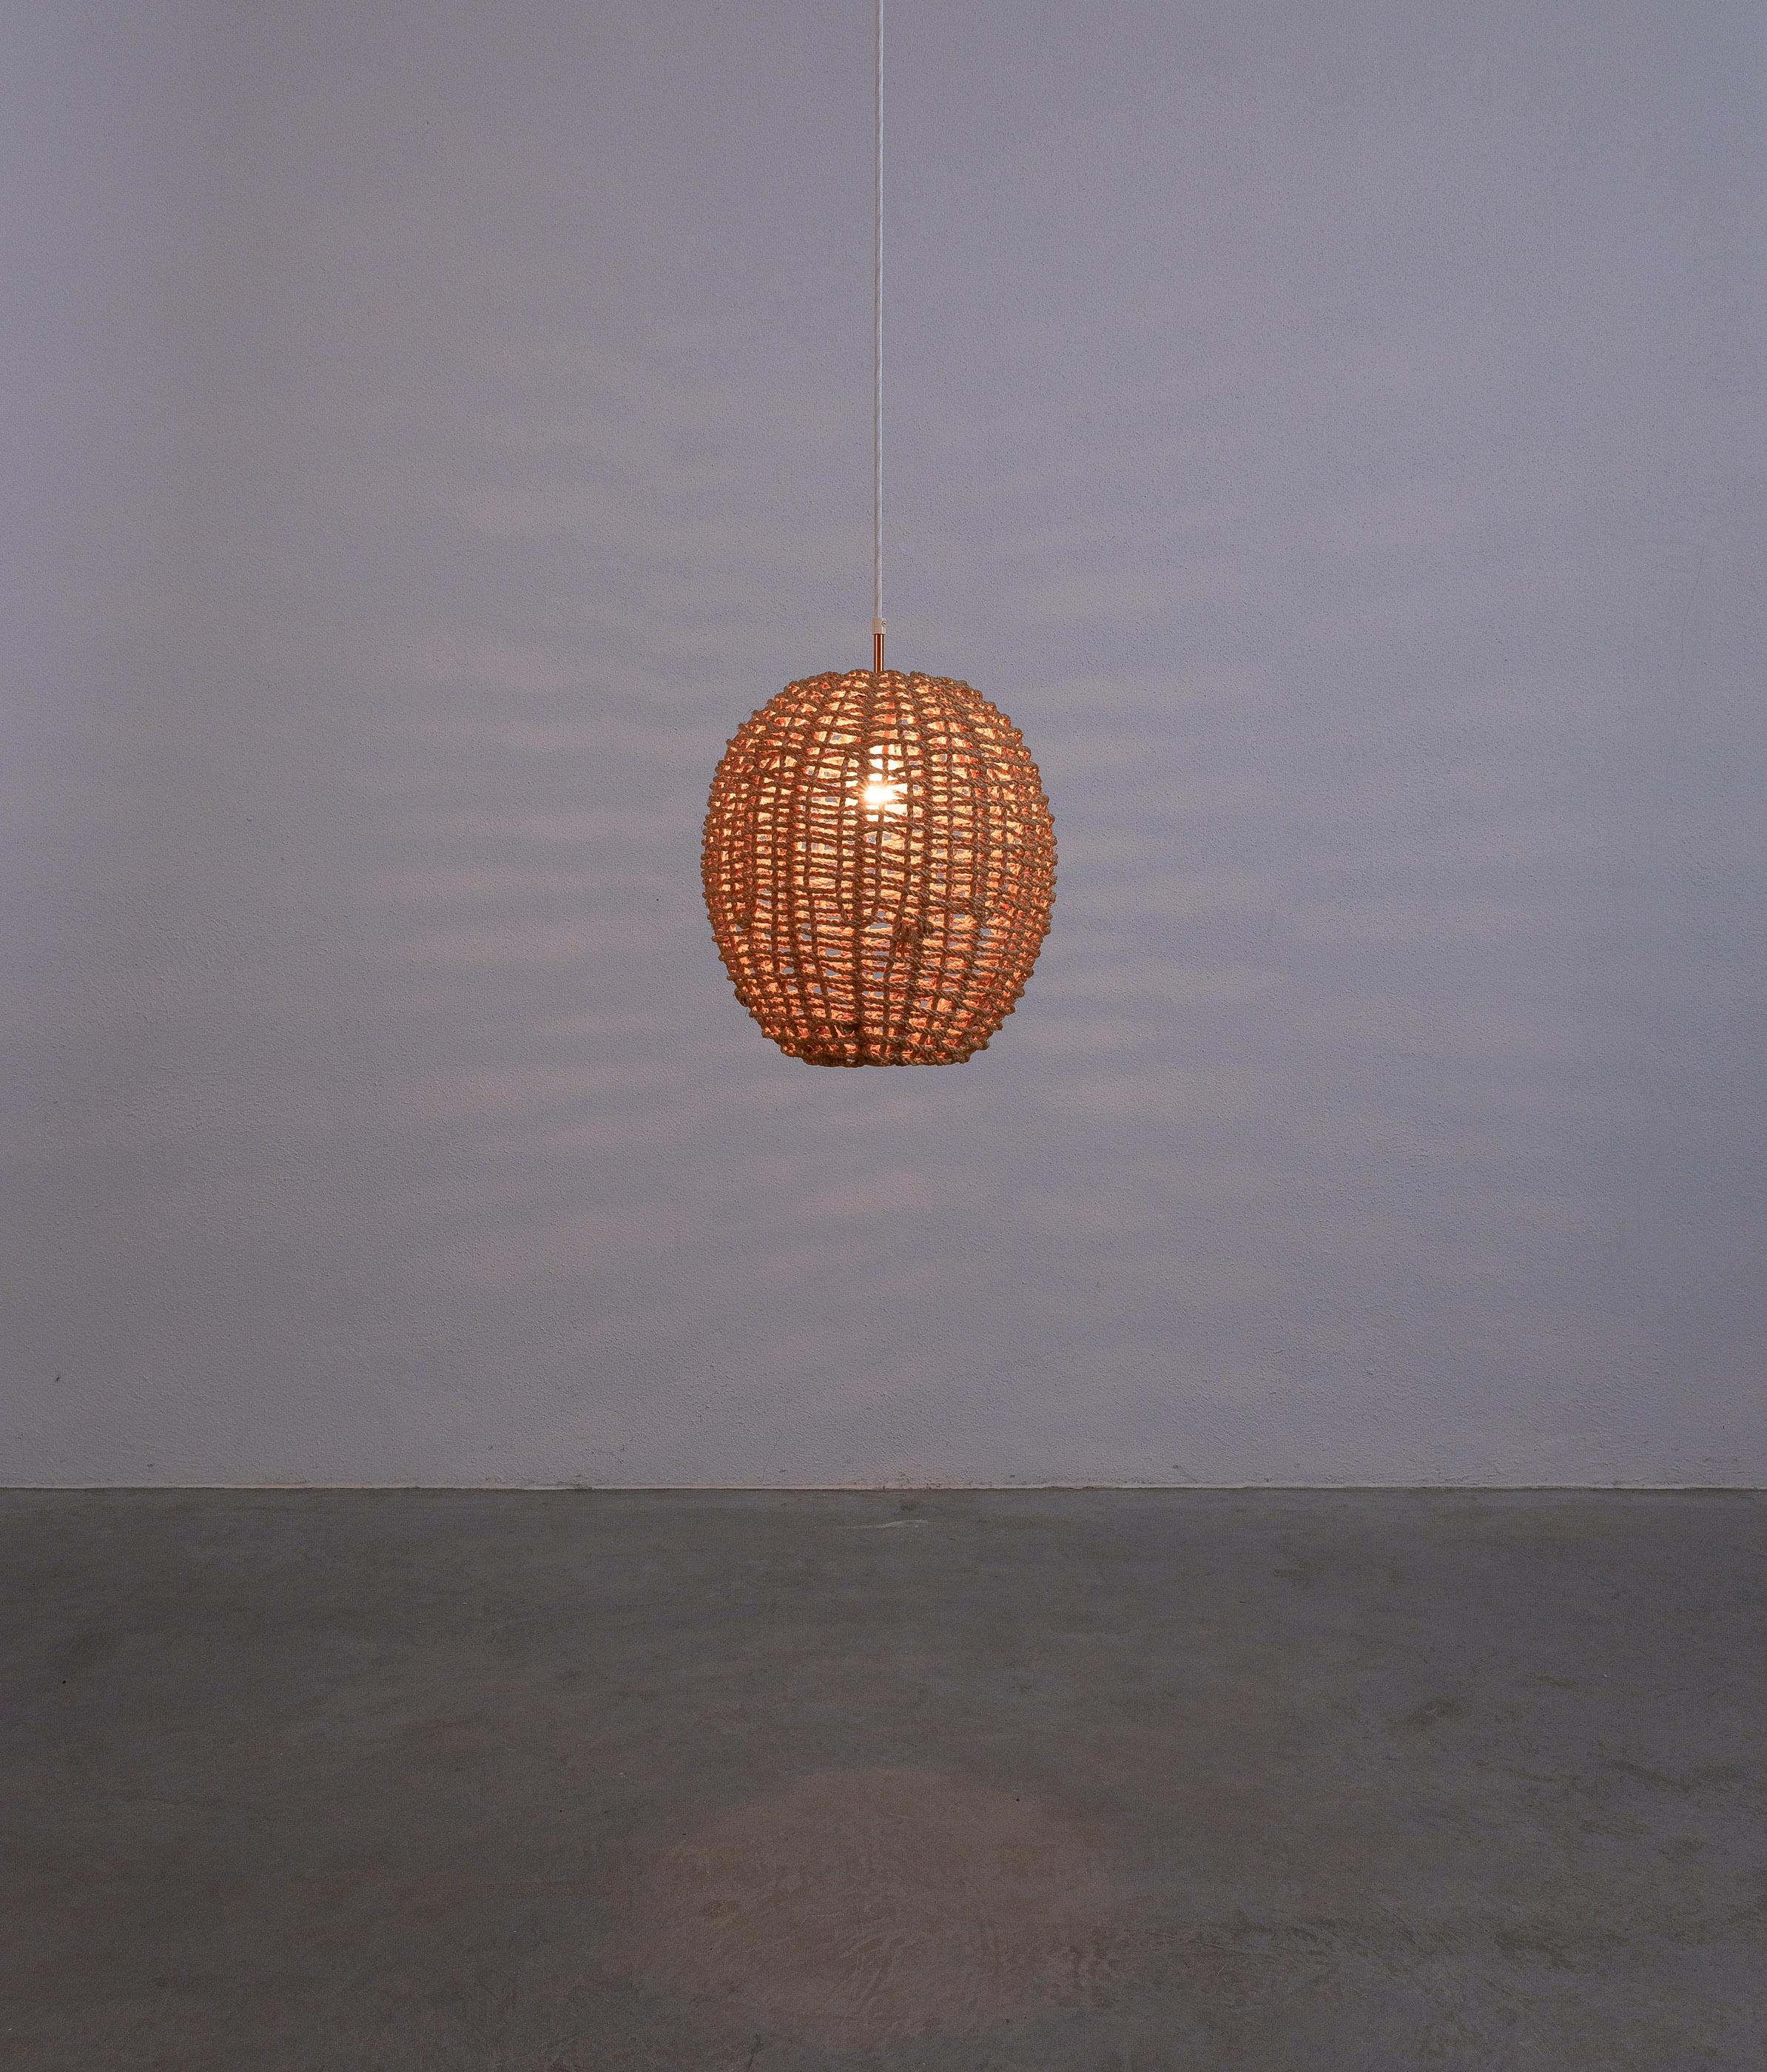 Audoux Minet Pendant Lamp Made from Rope and Brass, France, 1950
12.6